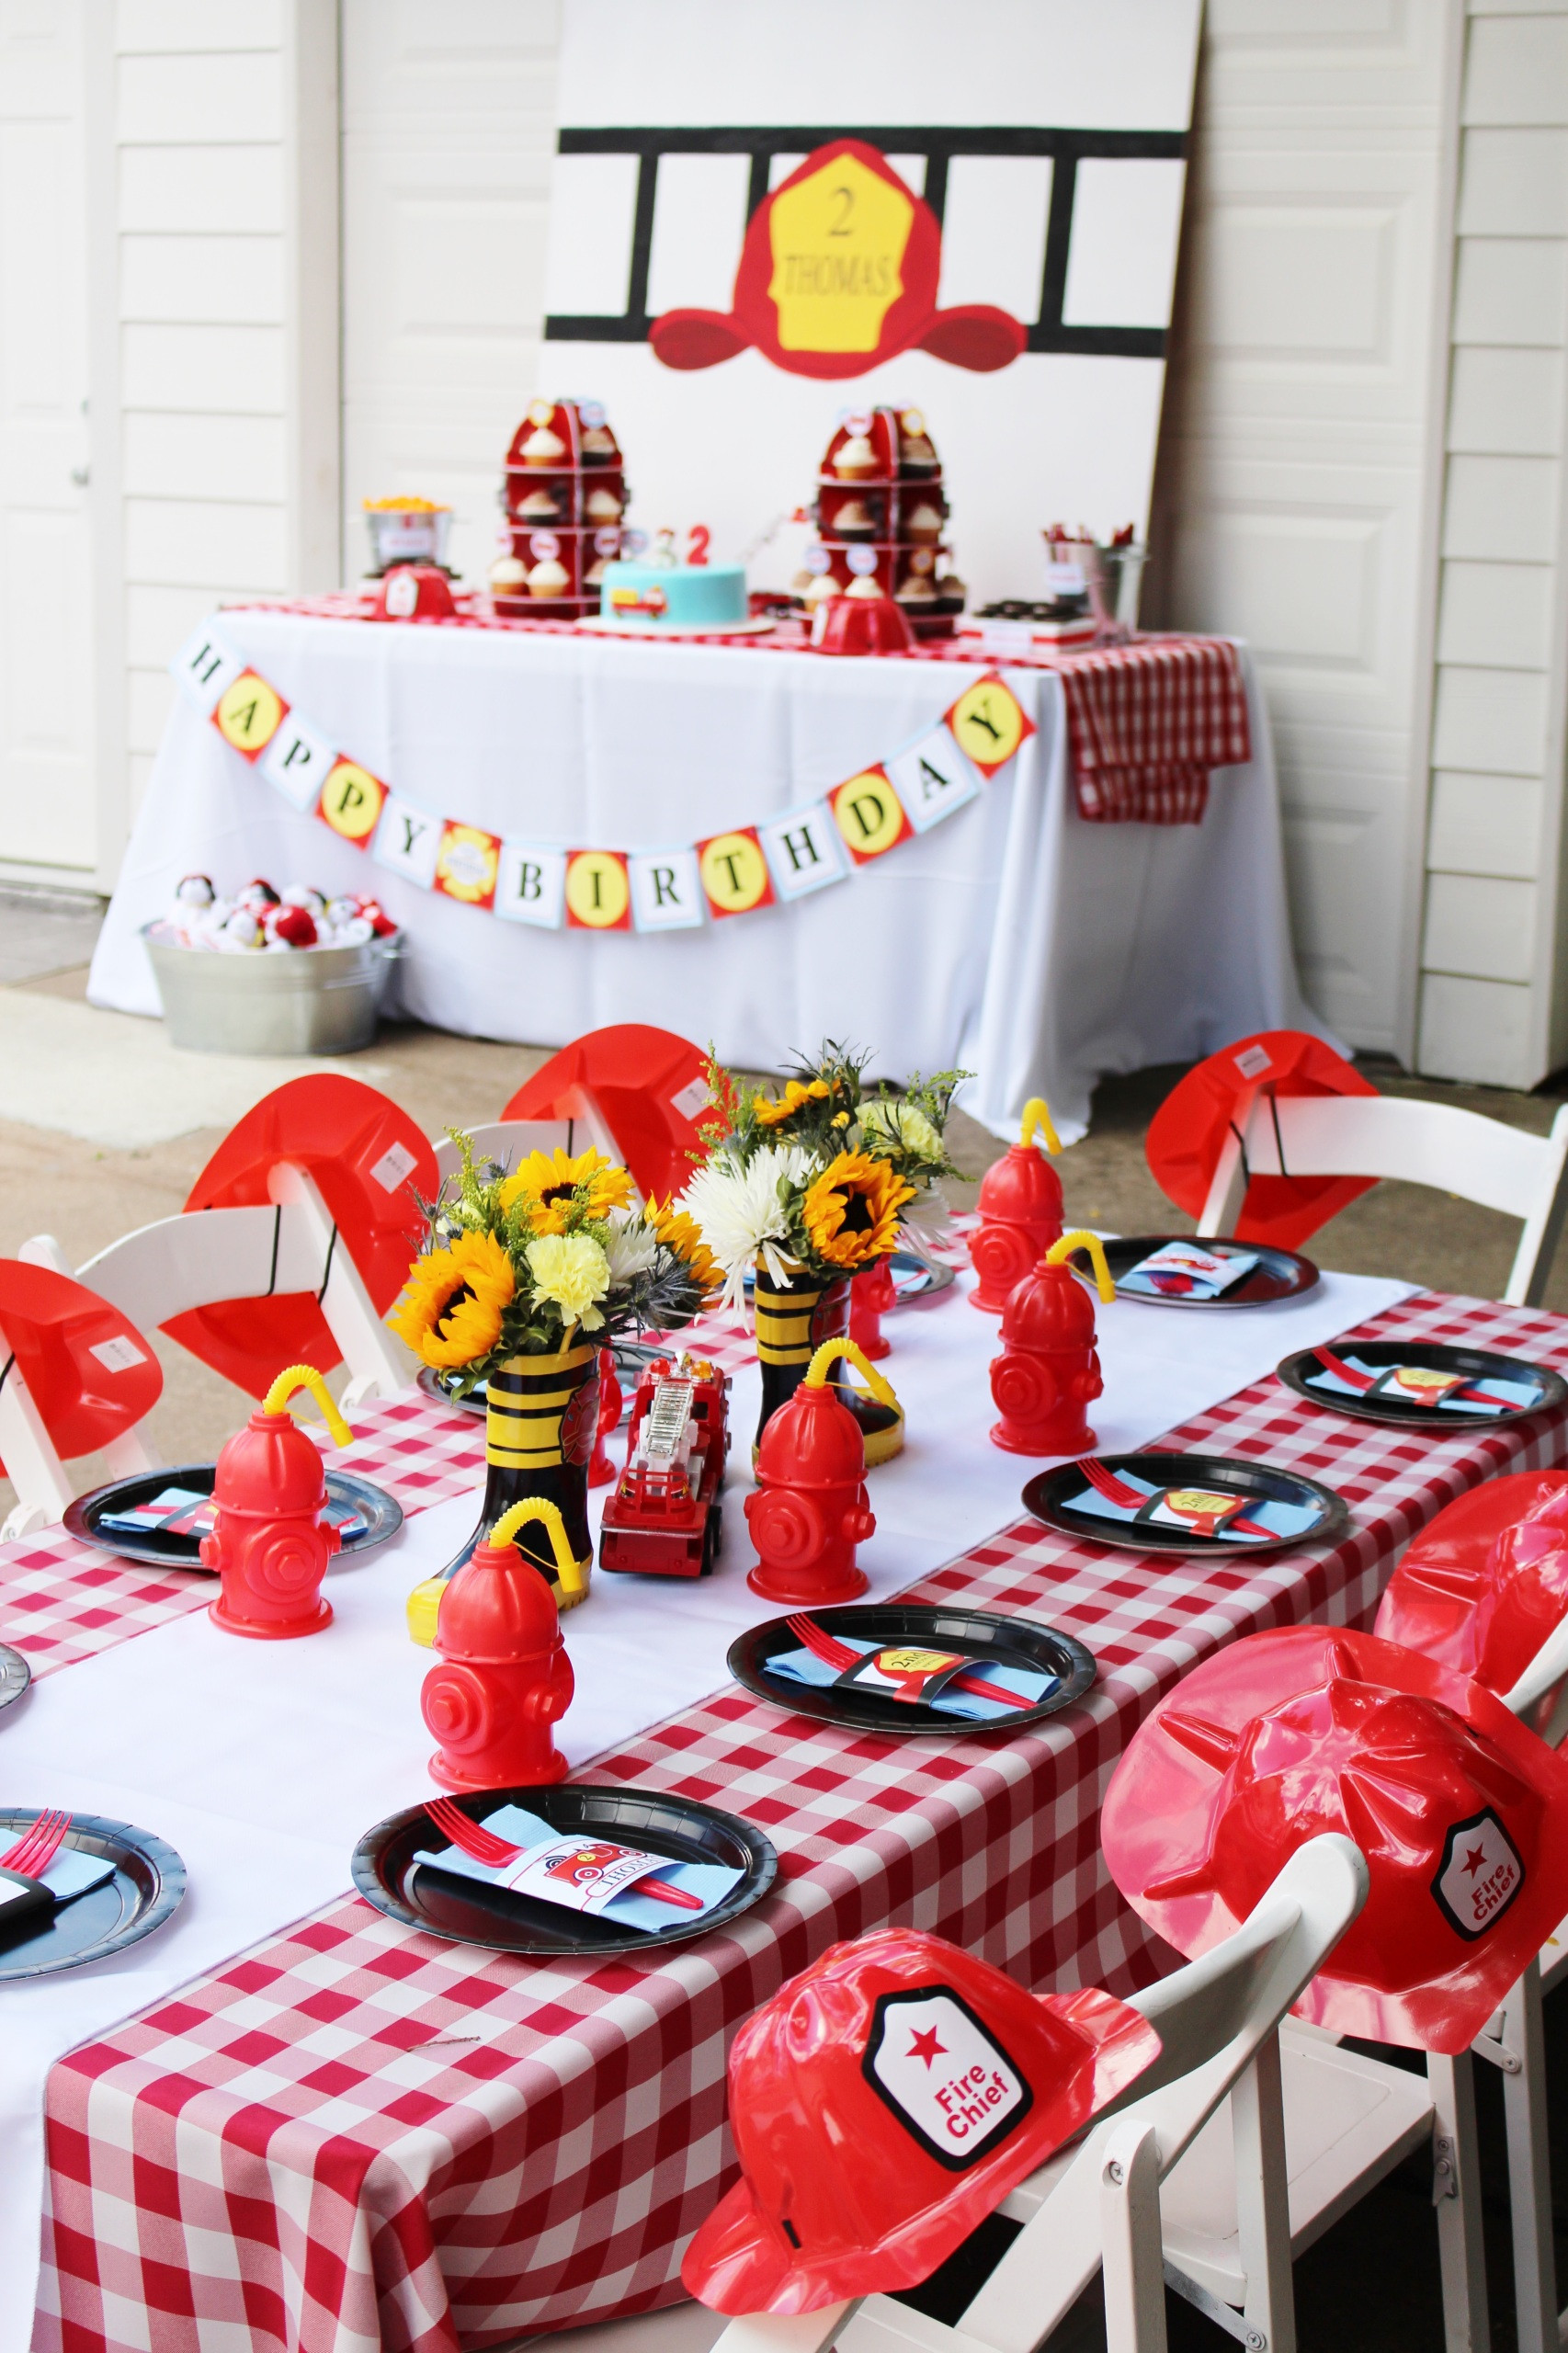 Firefighter Graduation Party Ideas
 Fireman Party Theme Firetruck Party Printables Crowning